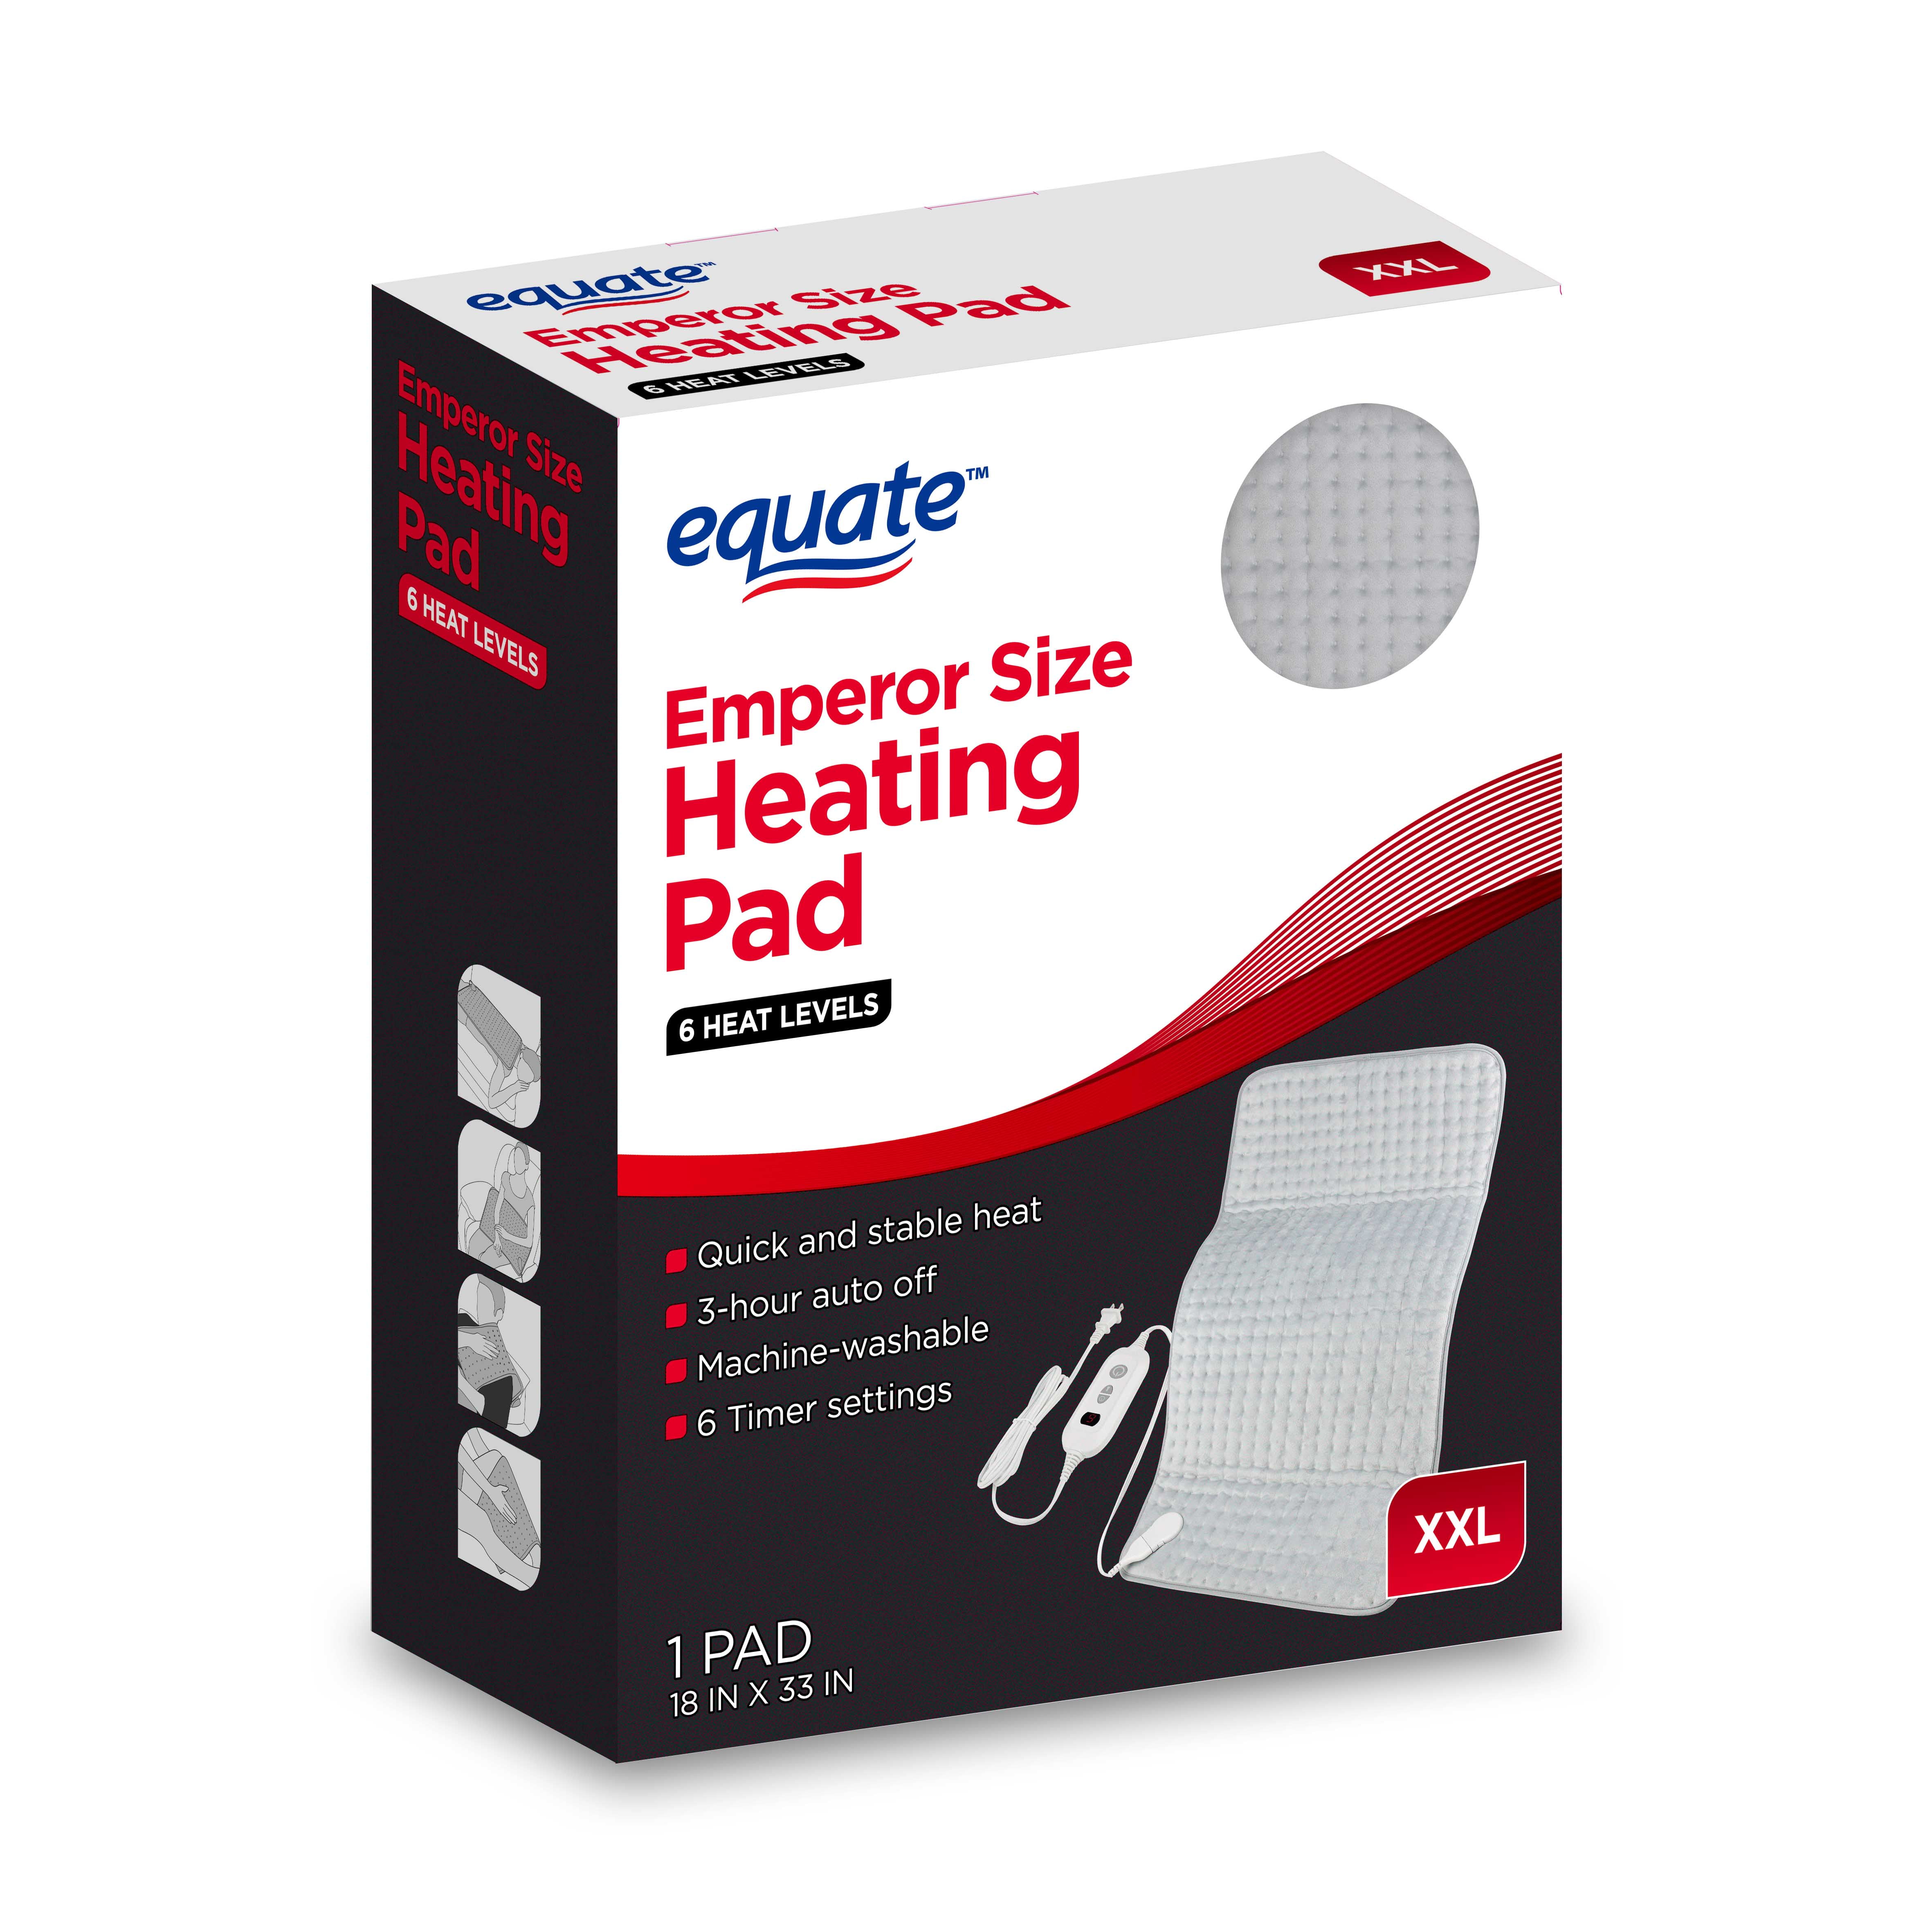 Equate XXL Electric Heating Pad, 6 Heat Settings with Auto Shut Off, 18 x 33 in